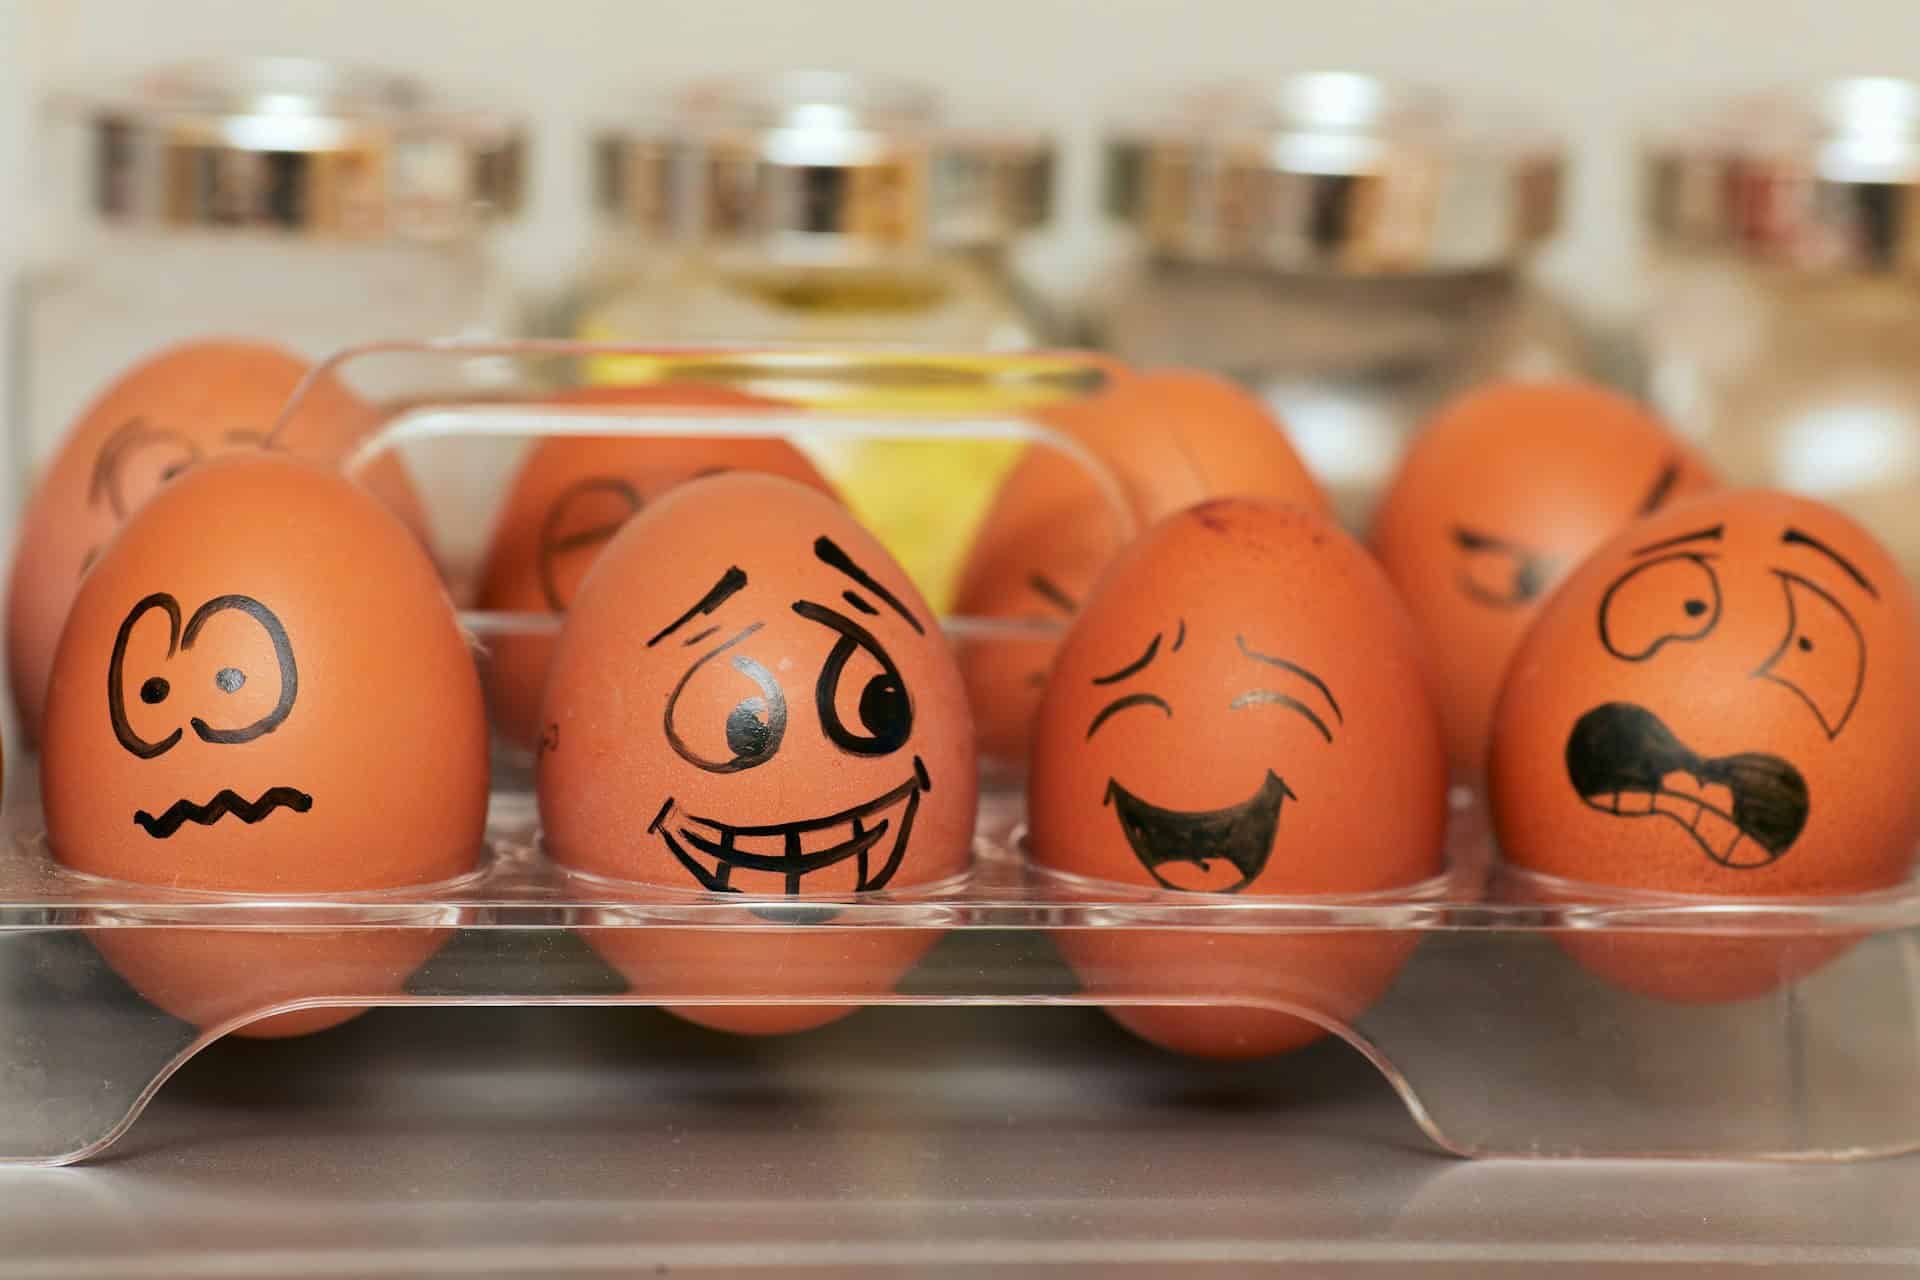 Eggs with Emotions of Losing a Job